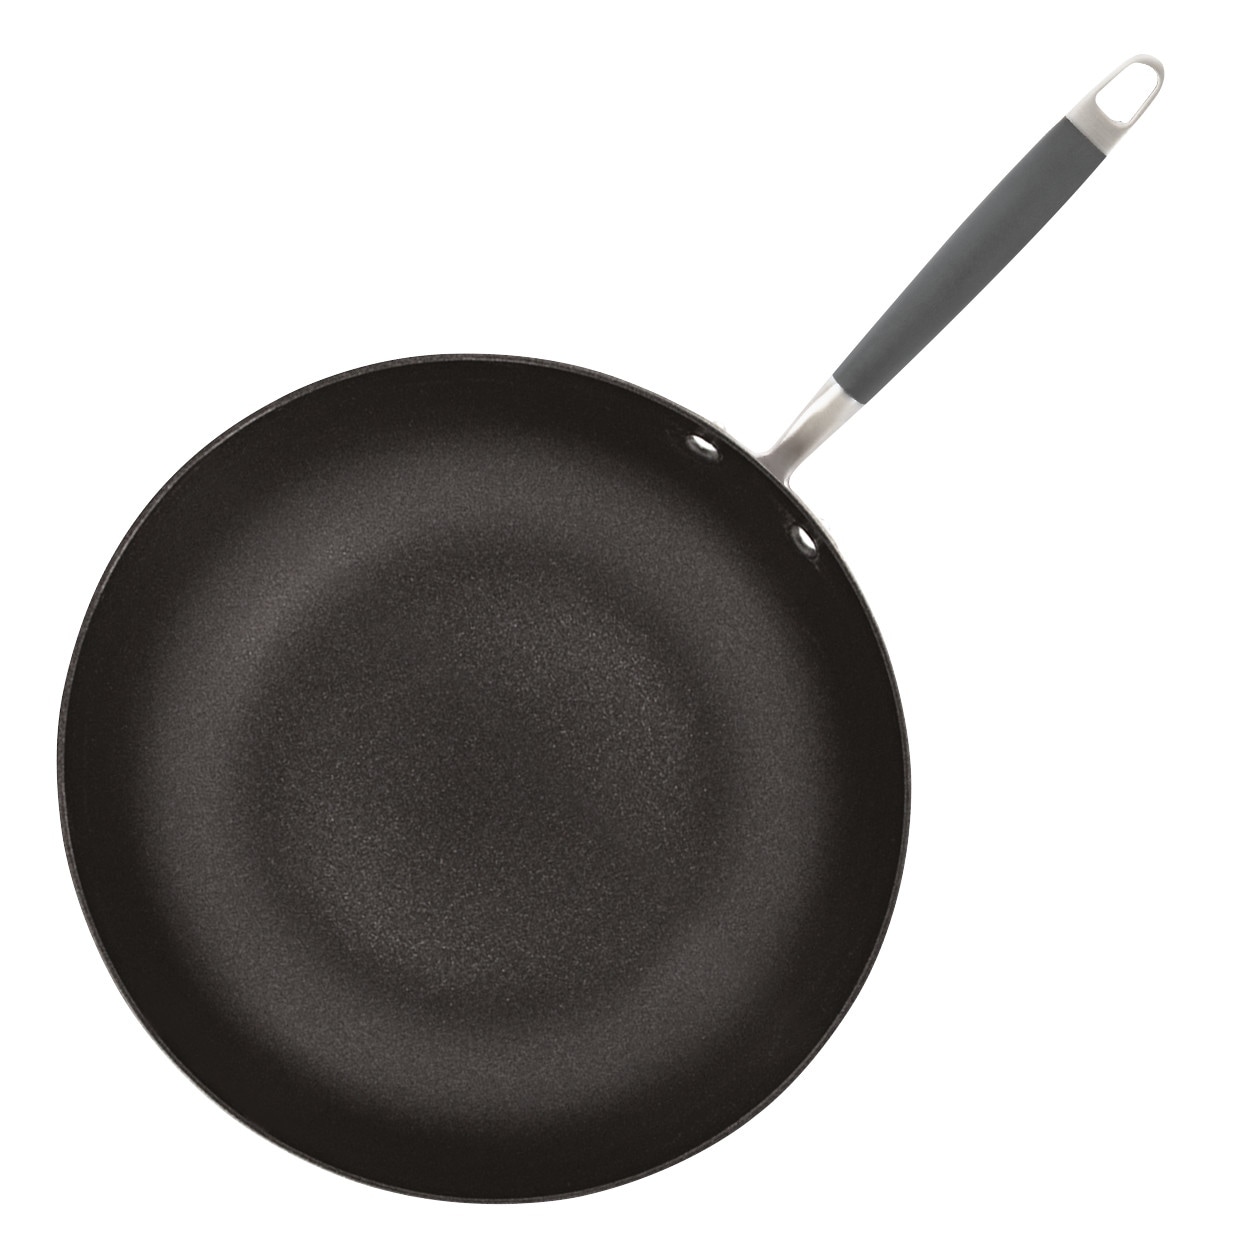 https://ak1.ostkcdn.com/images/products/is/images/direct/644a331a284a881948c9a80538a9822b82dc6e9b/Anolon-Advanced-Hard-Anodized-Nonstick-Ultimate-Pan-with-Lid%2C-12-Inch%2C-Gray.jpg